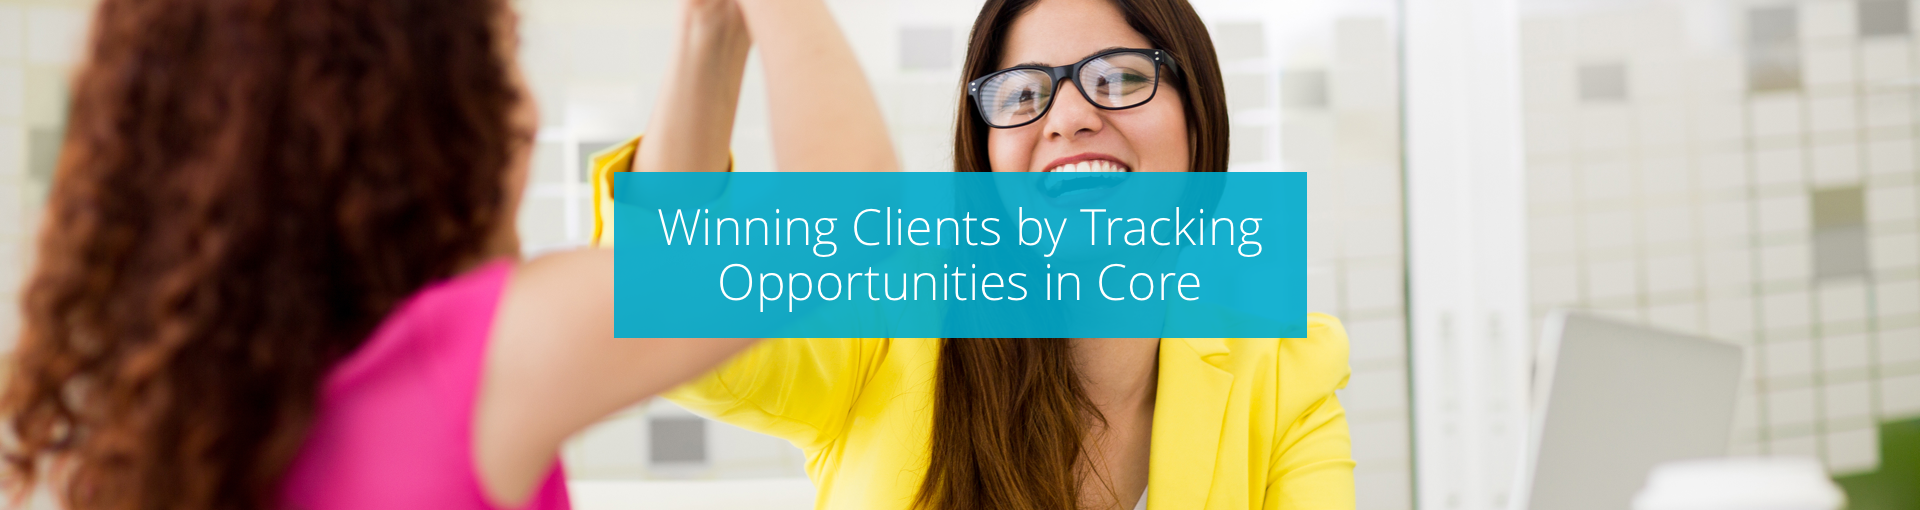 Winning Clients by Tracking Opportunities in CORE Featured Image